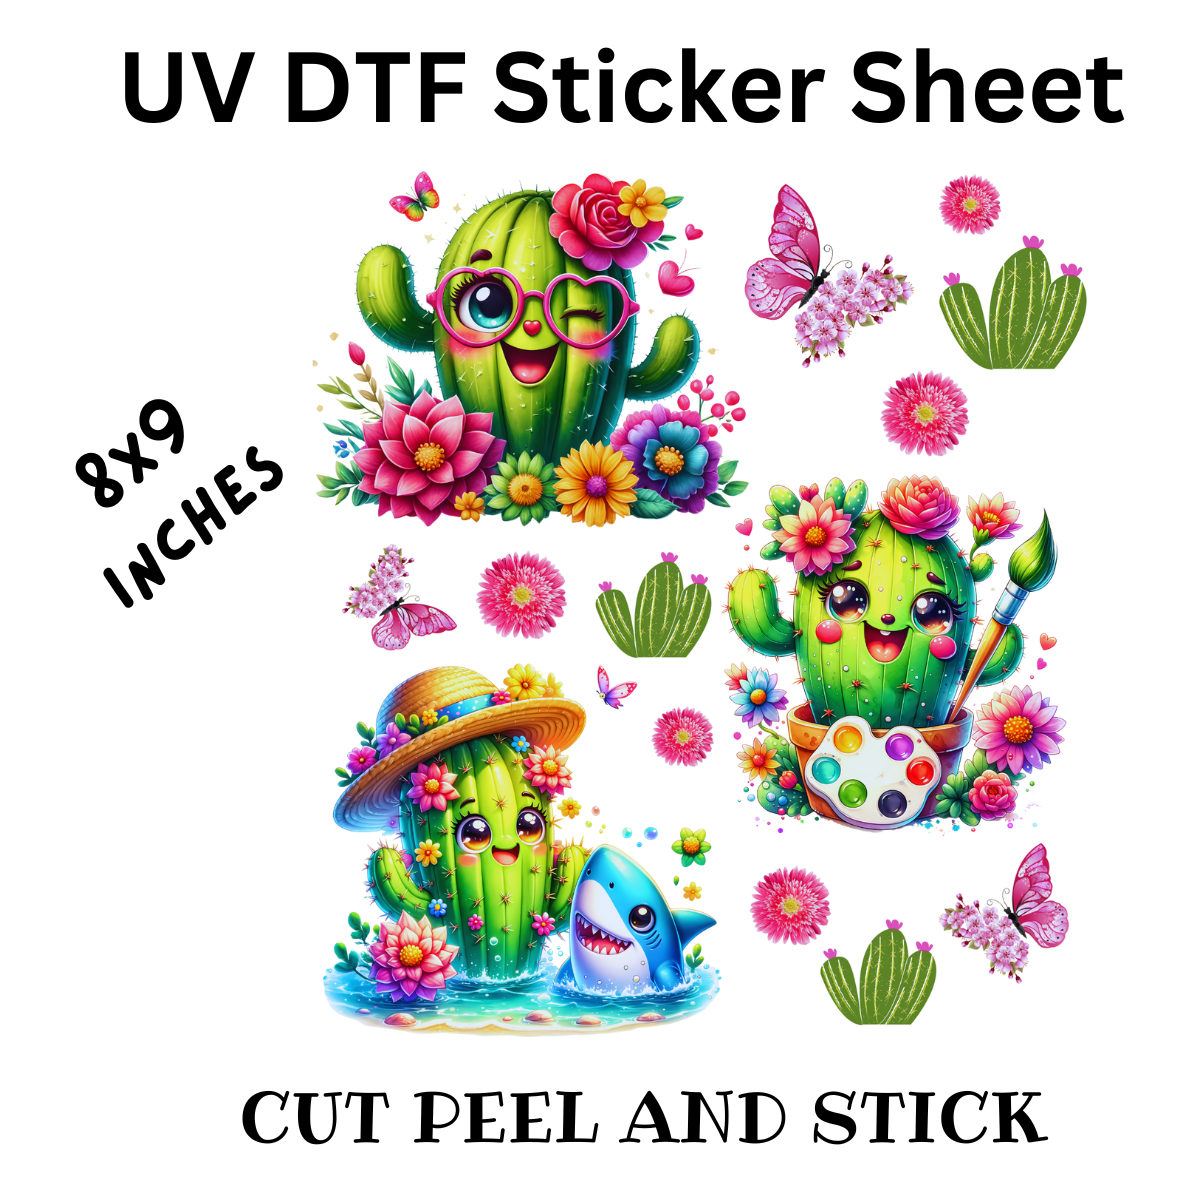 Fun Cactus UV DTF Decal Sticker Sheet 8x9 inches